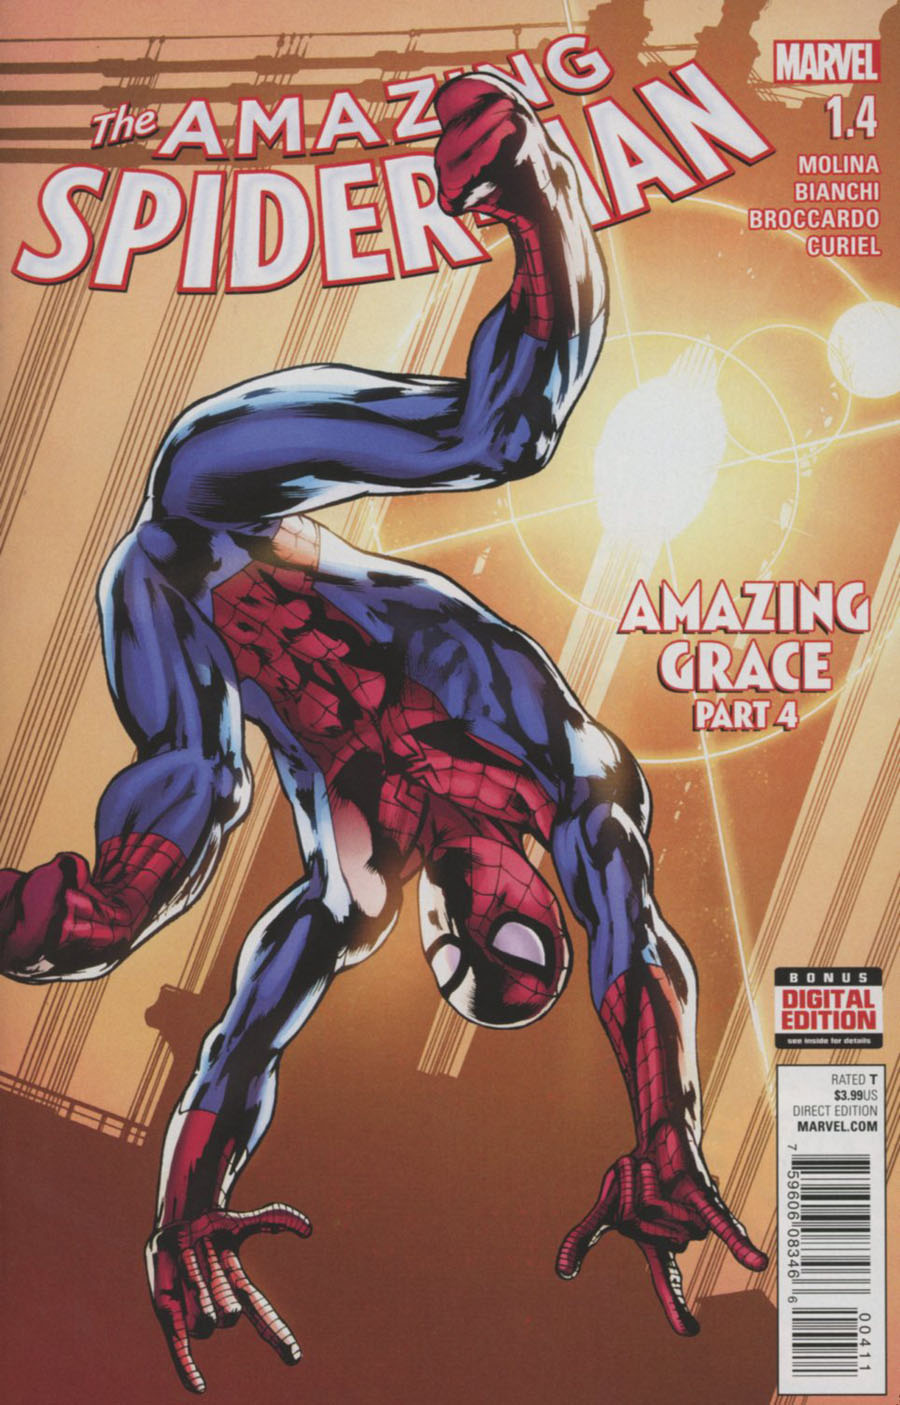 Amazing Spider-Man Vol 4 #1.4 Cover A Regular Bryan Hitch Cover